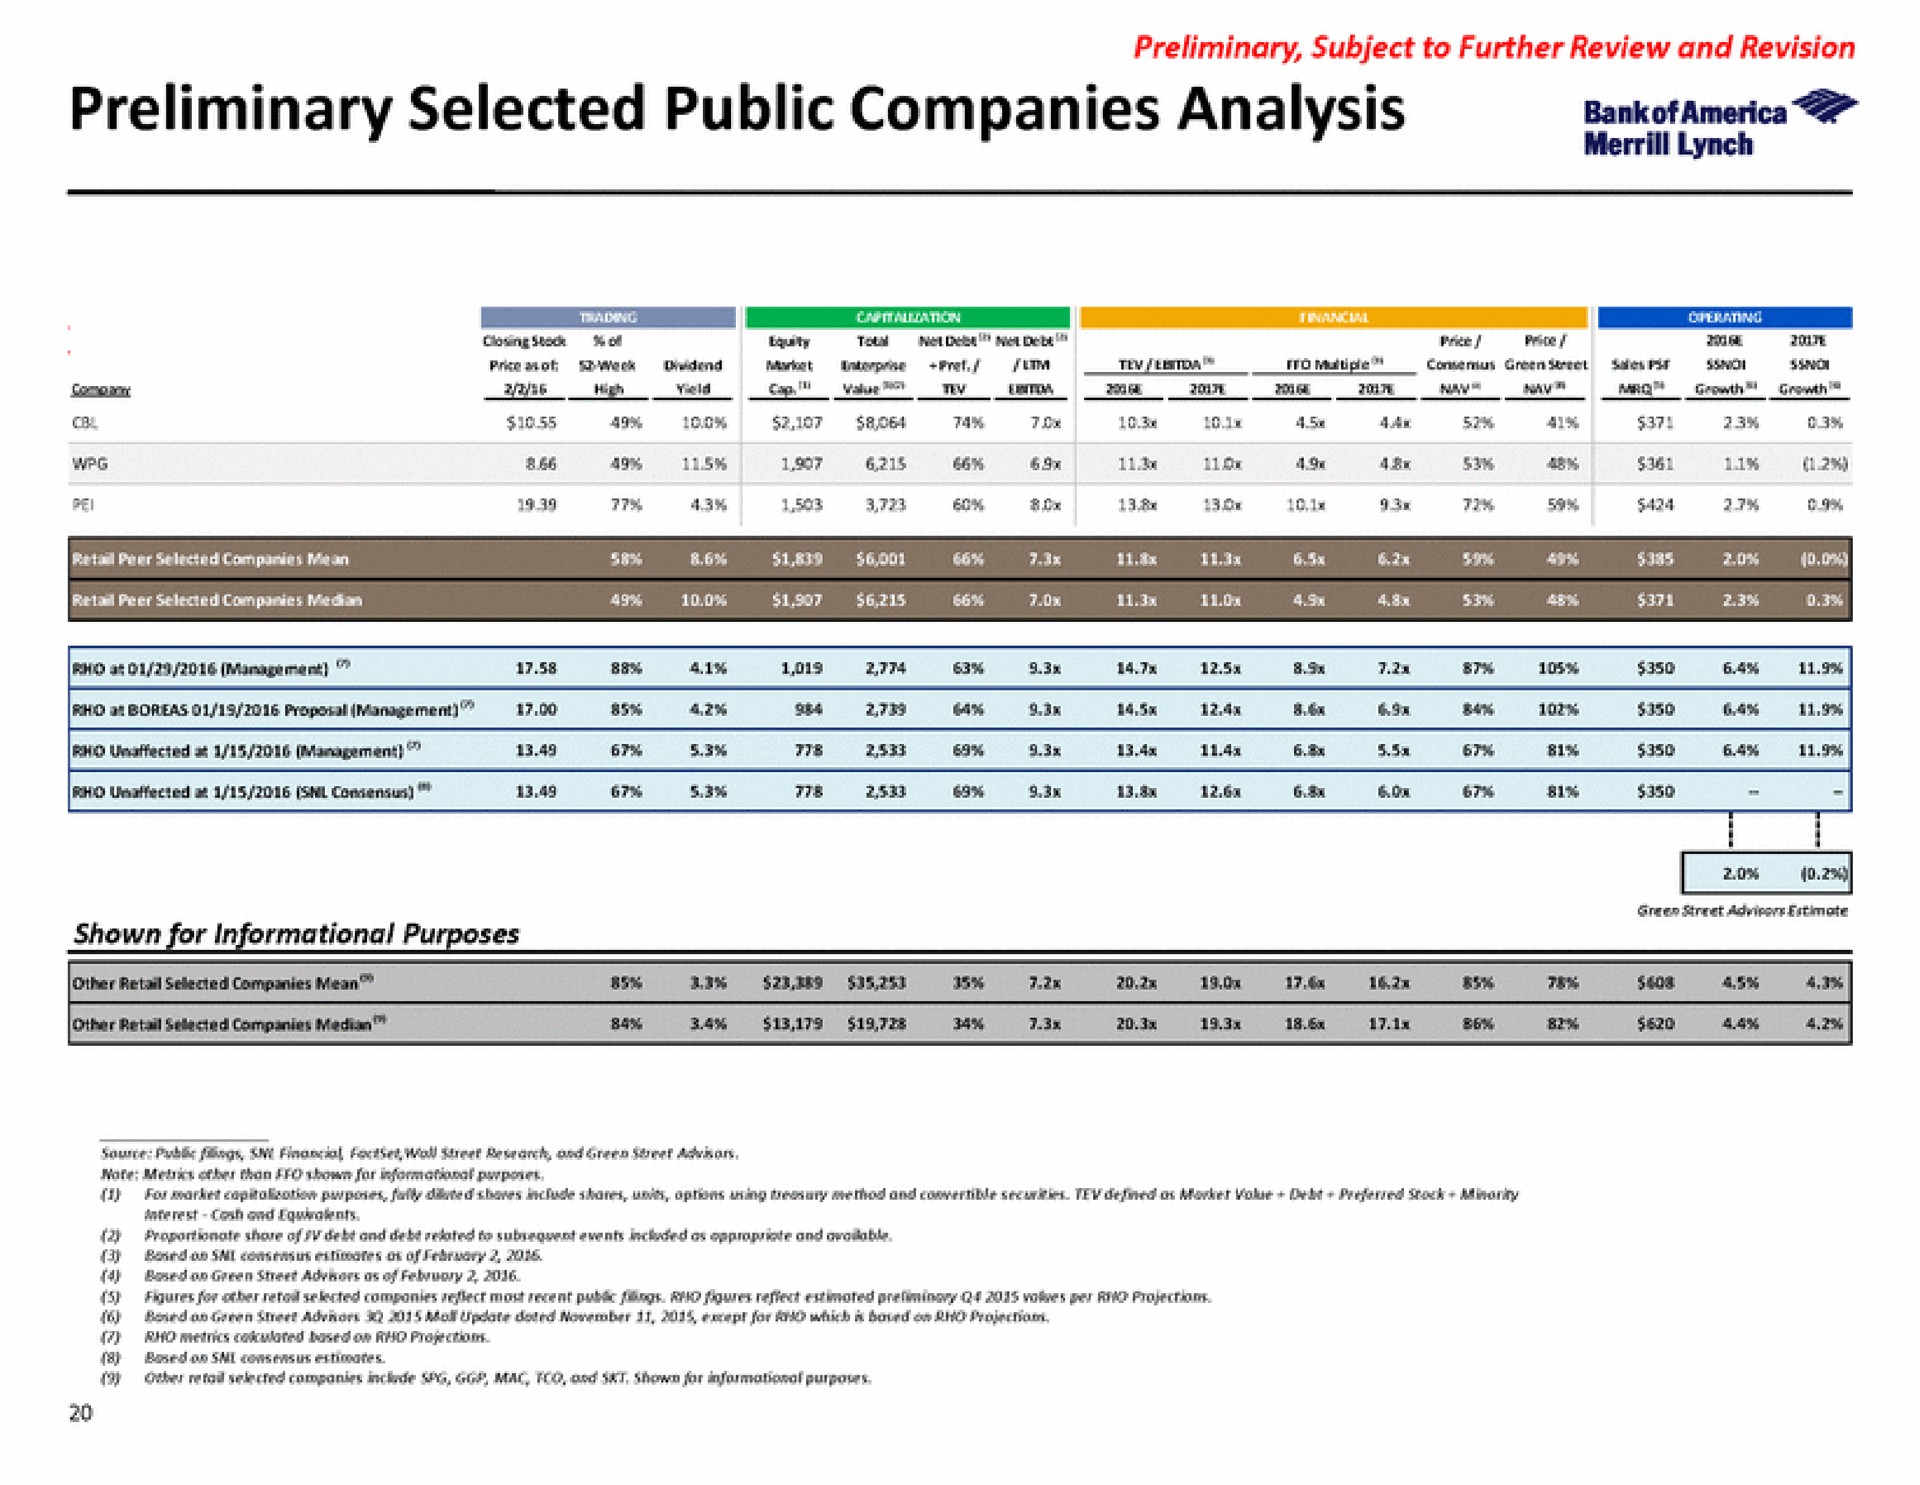 preliminary selected public companies analysis | Bank of America